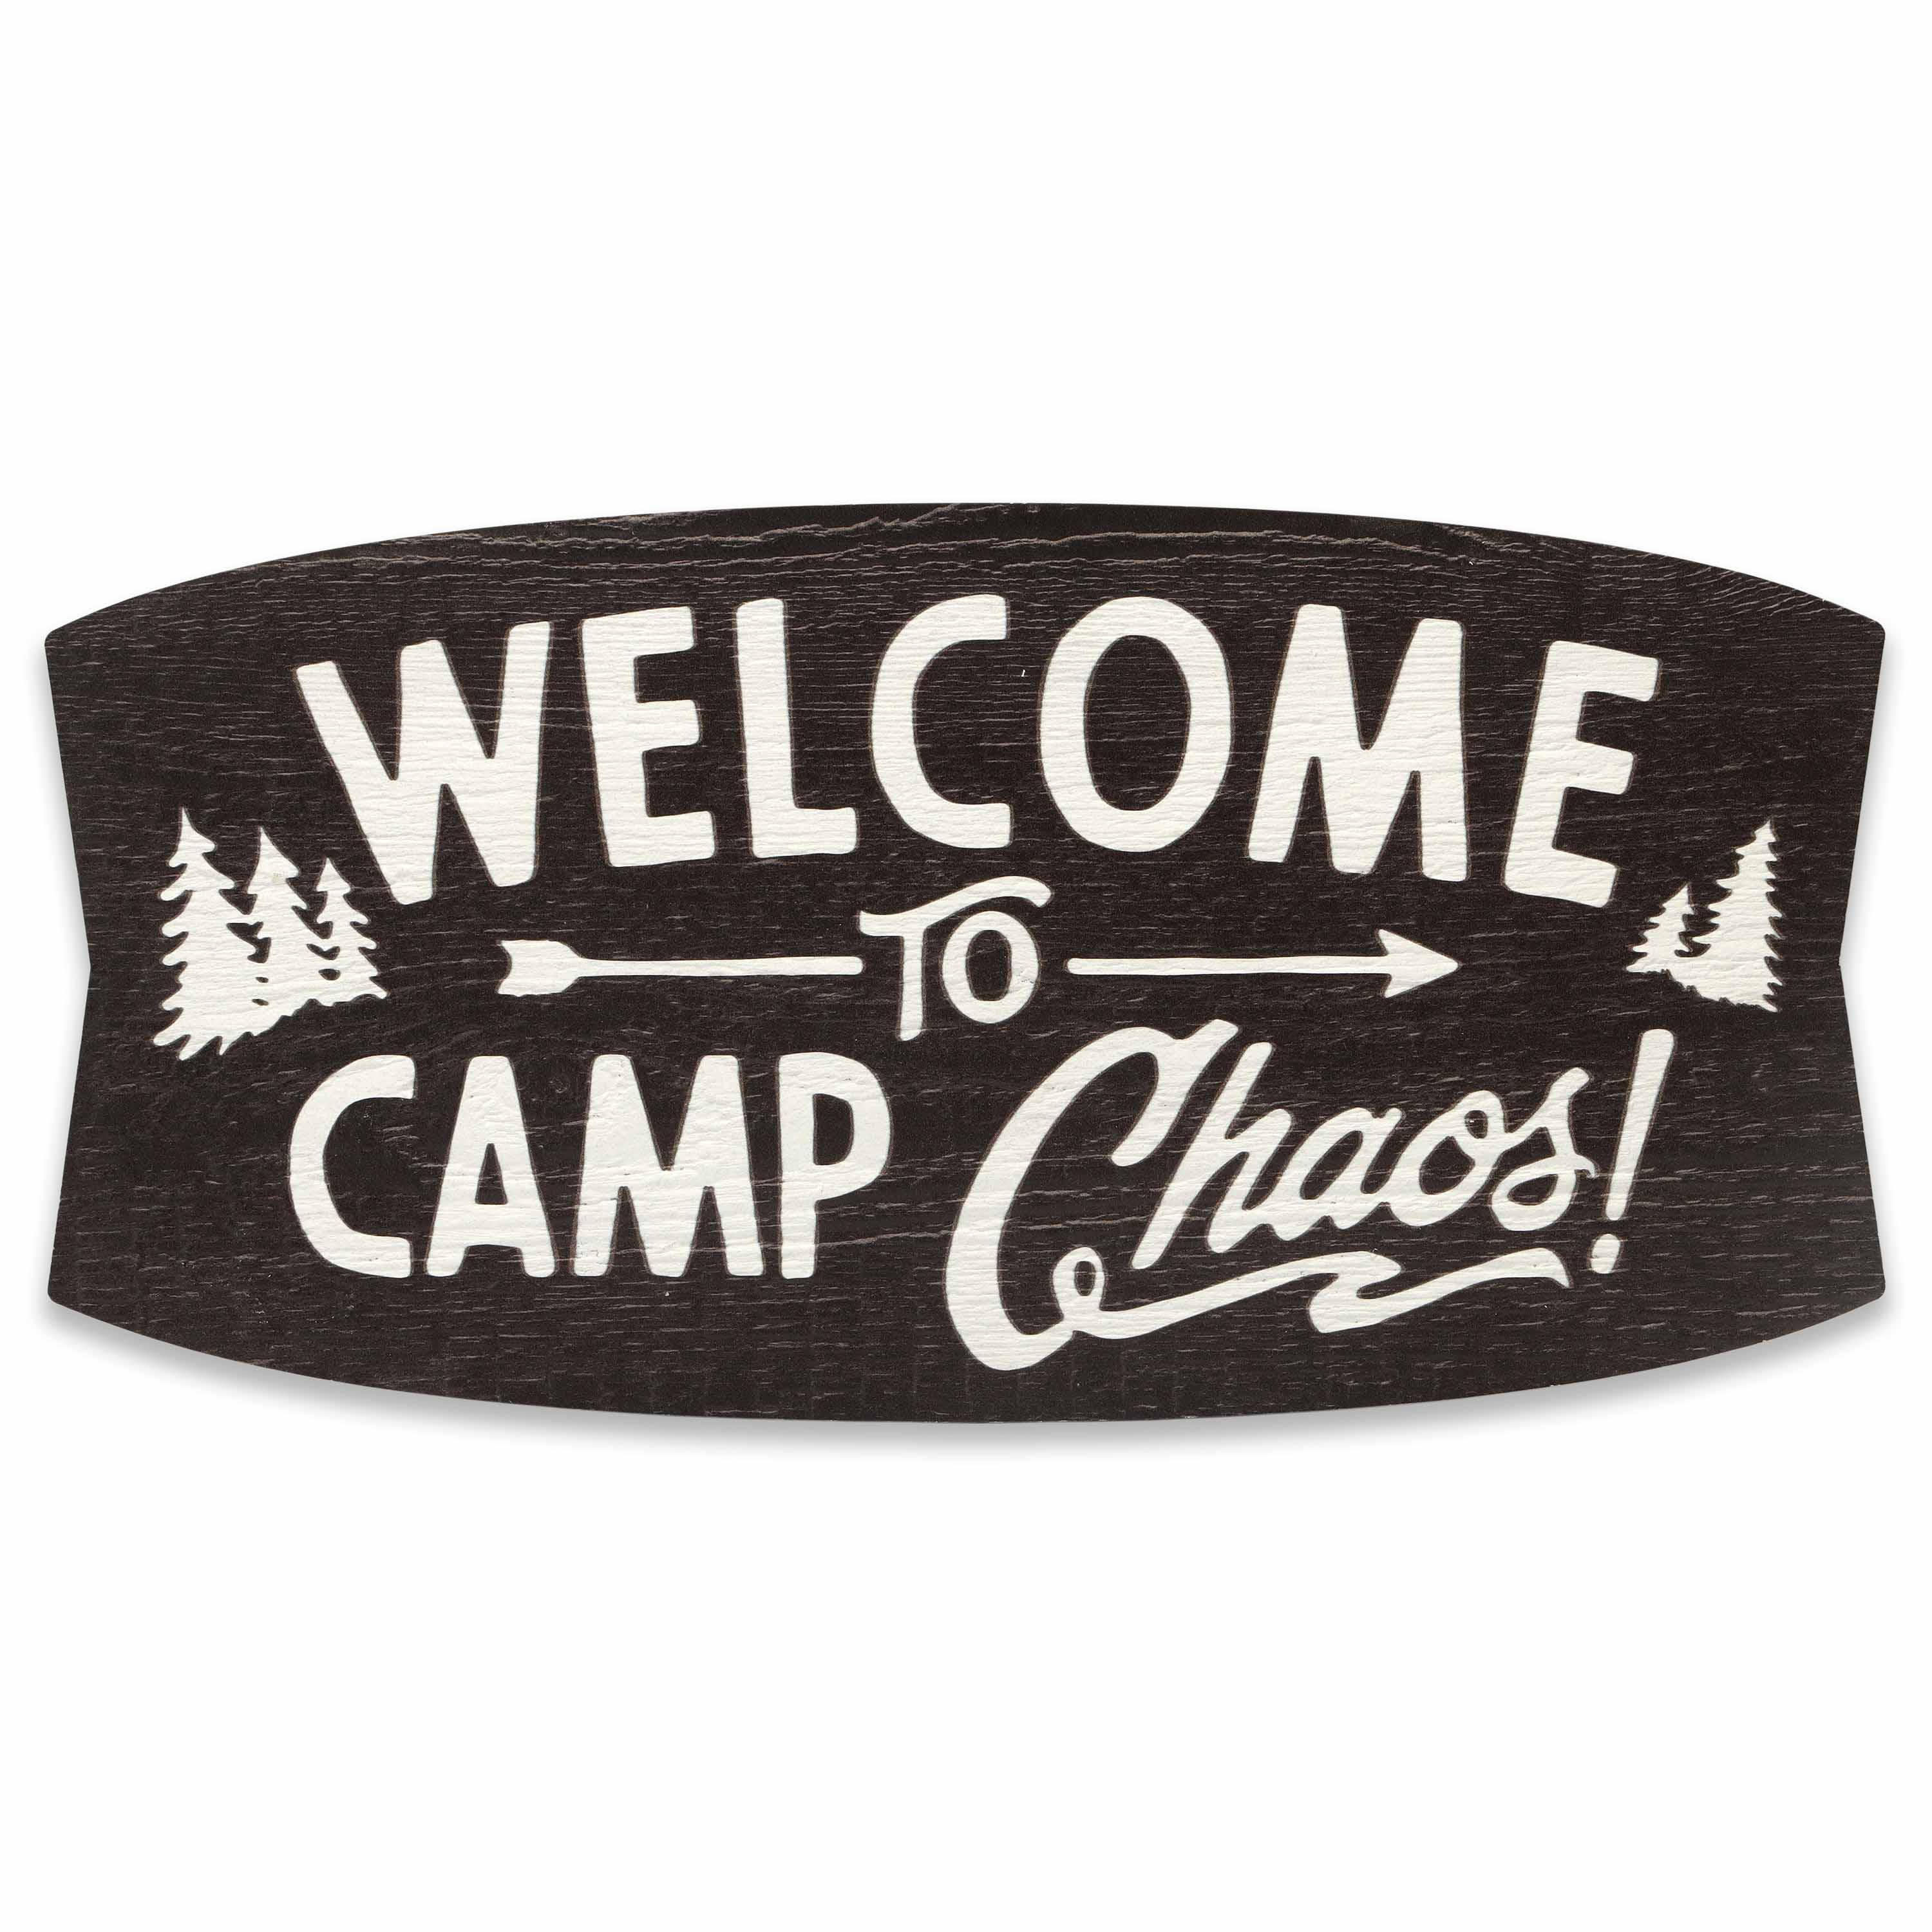 Open Road's Welcome to Camp Chaos Wood Sign